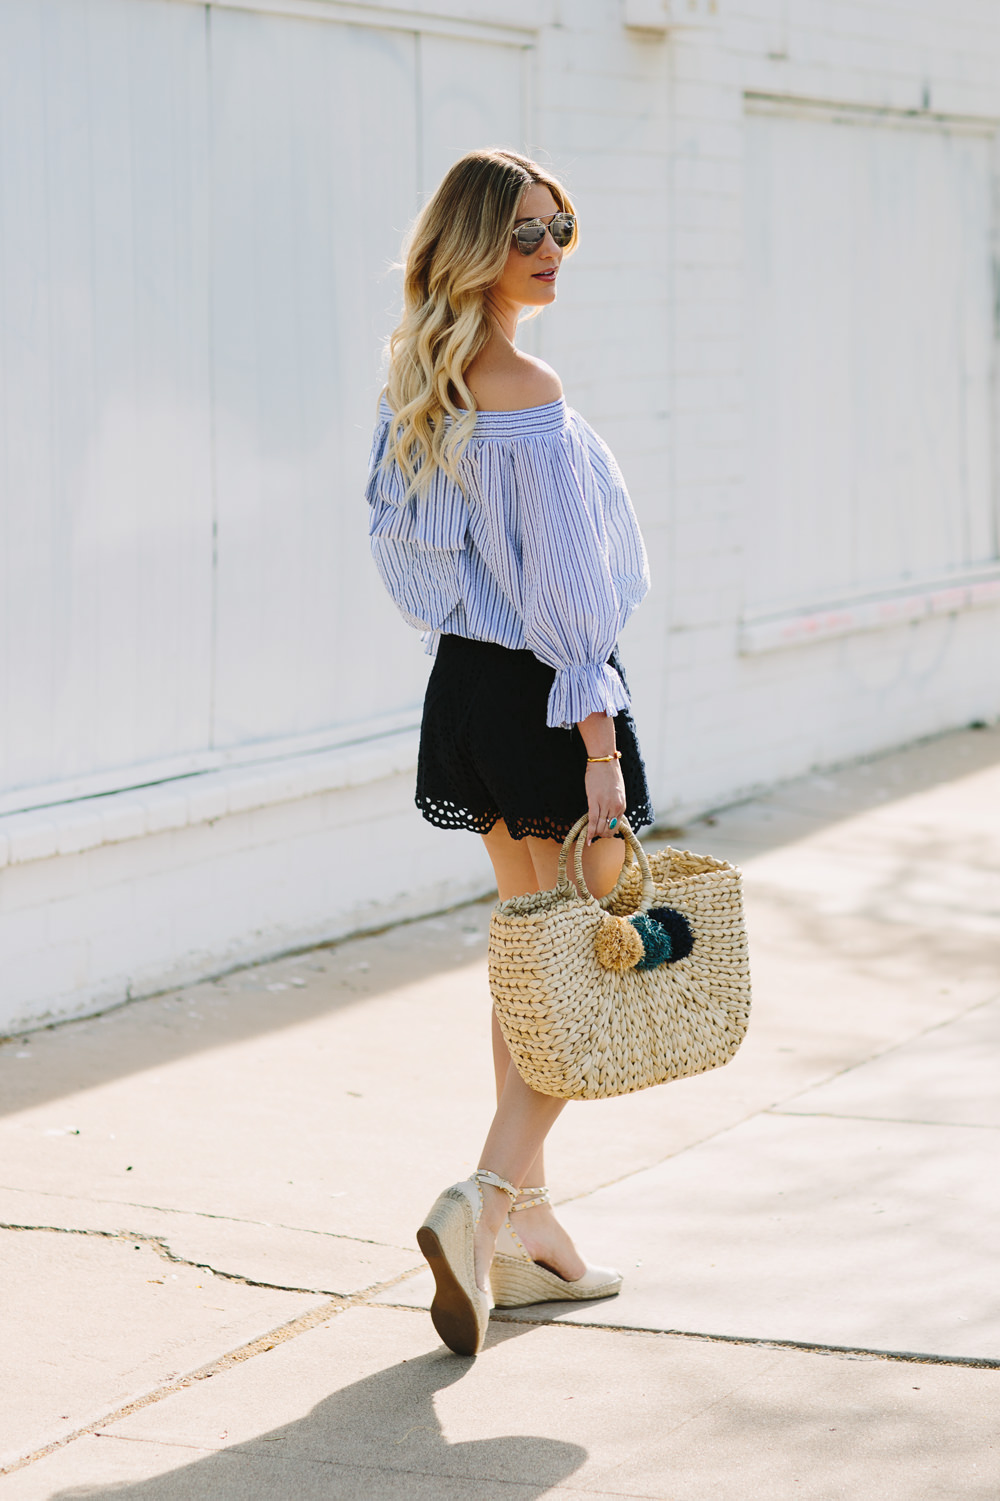 Dash of Darling styles a pastel blue Chicwish stripe off shoulder bow top with Zimmermann lace shorts and a woven beach tote for a summer outfit.